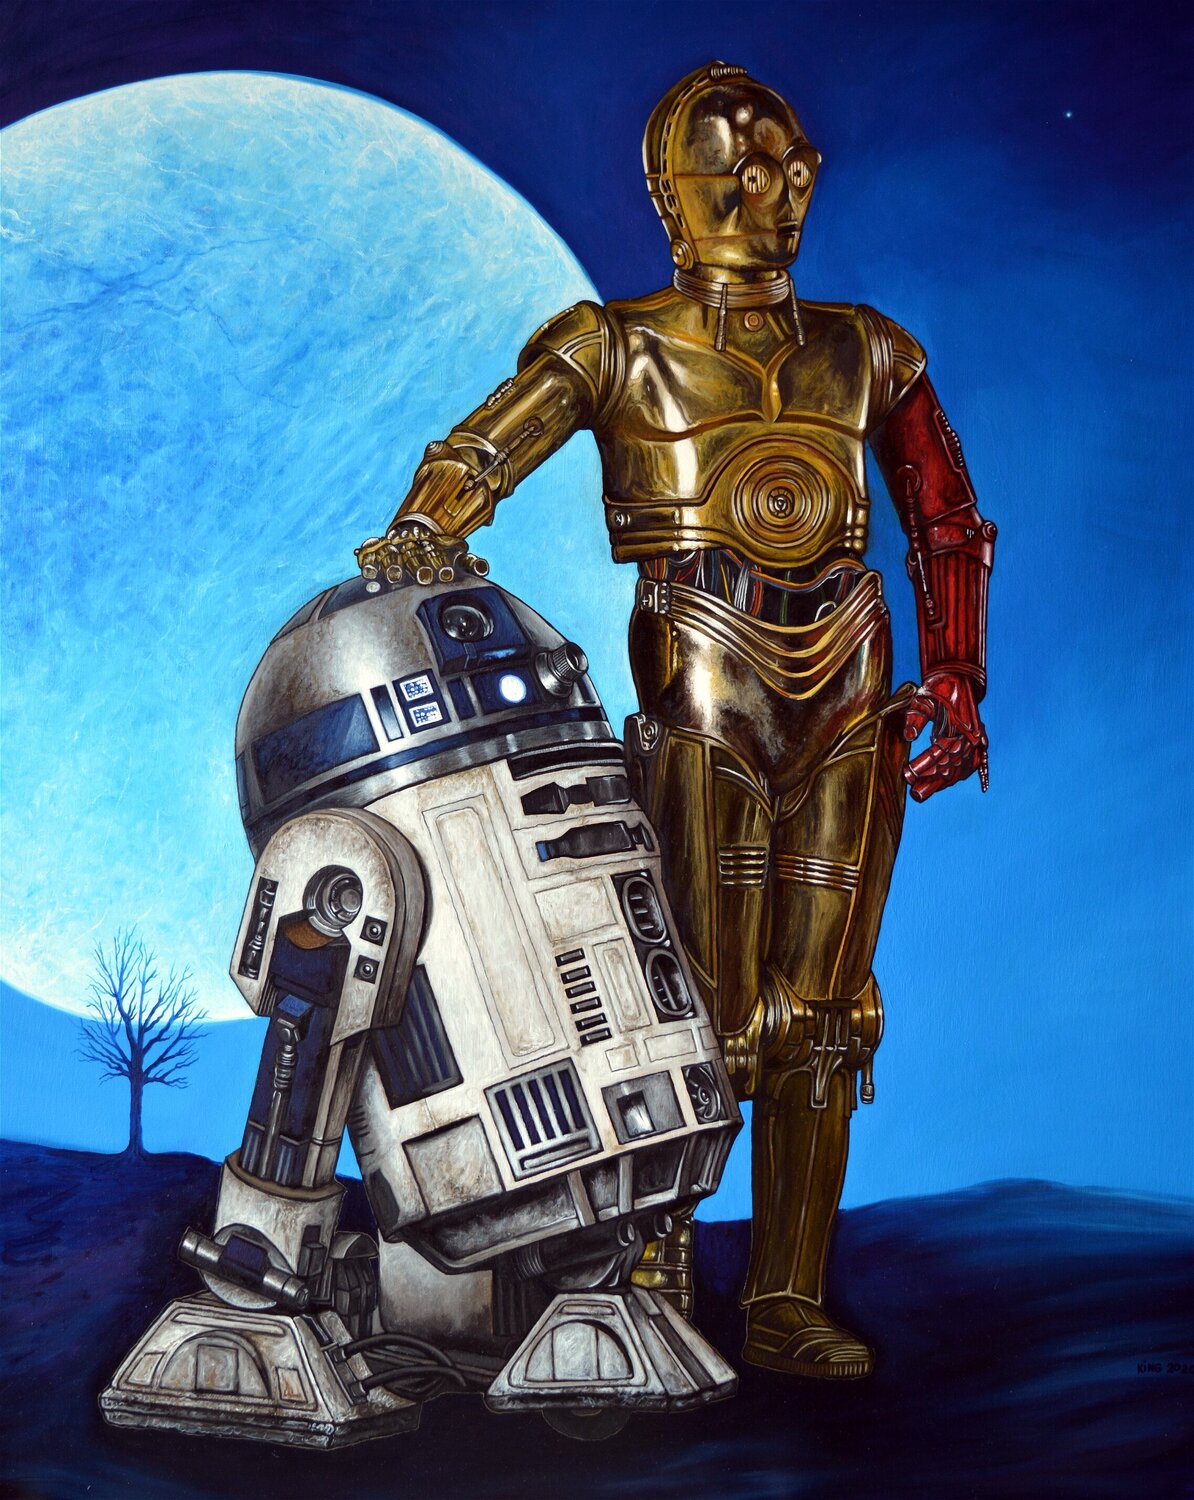 charlie genobia recommends Picture Of C3po And R2d2